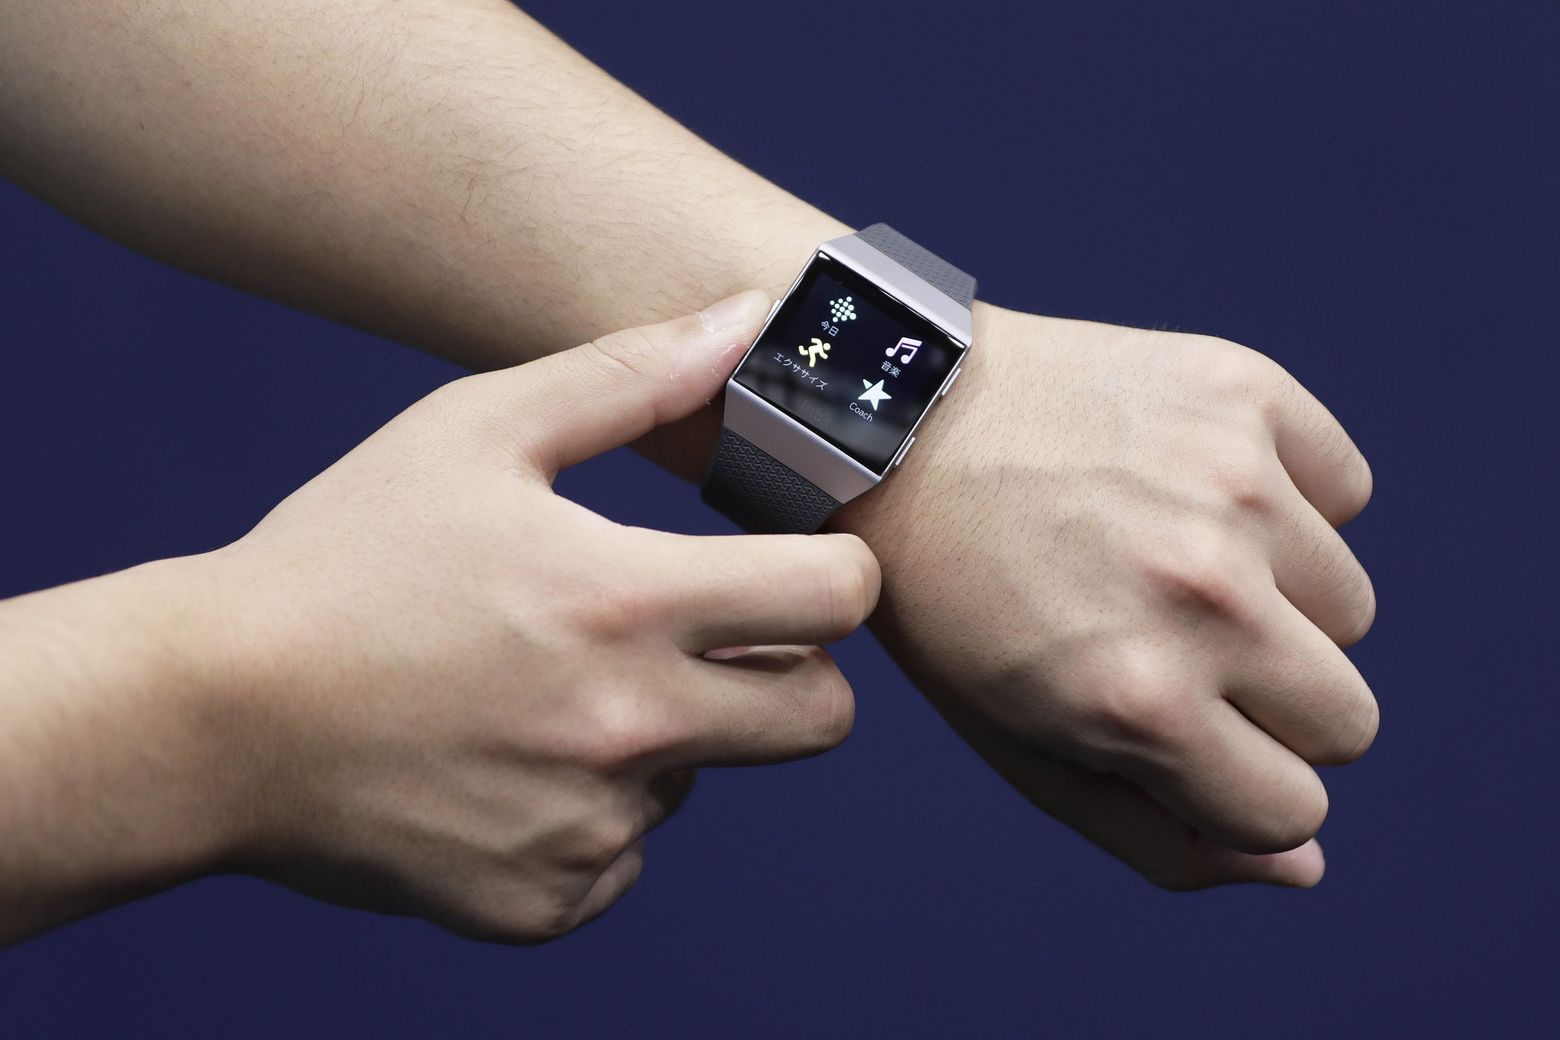 $2.1 billion Fitbit highlights growing interest in wearable health | The Seattle Times